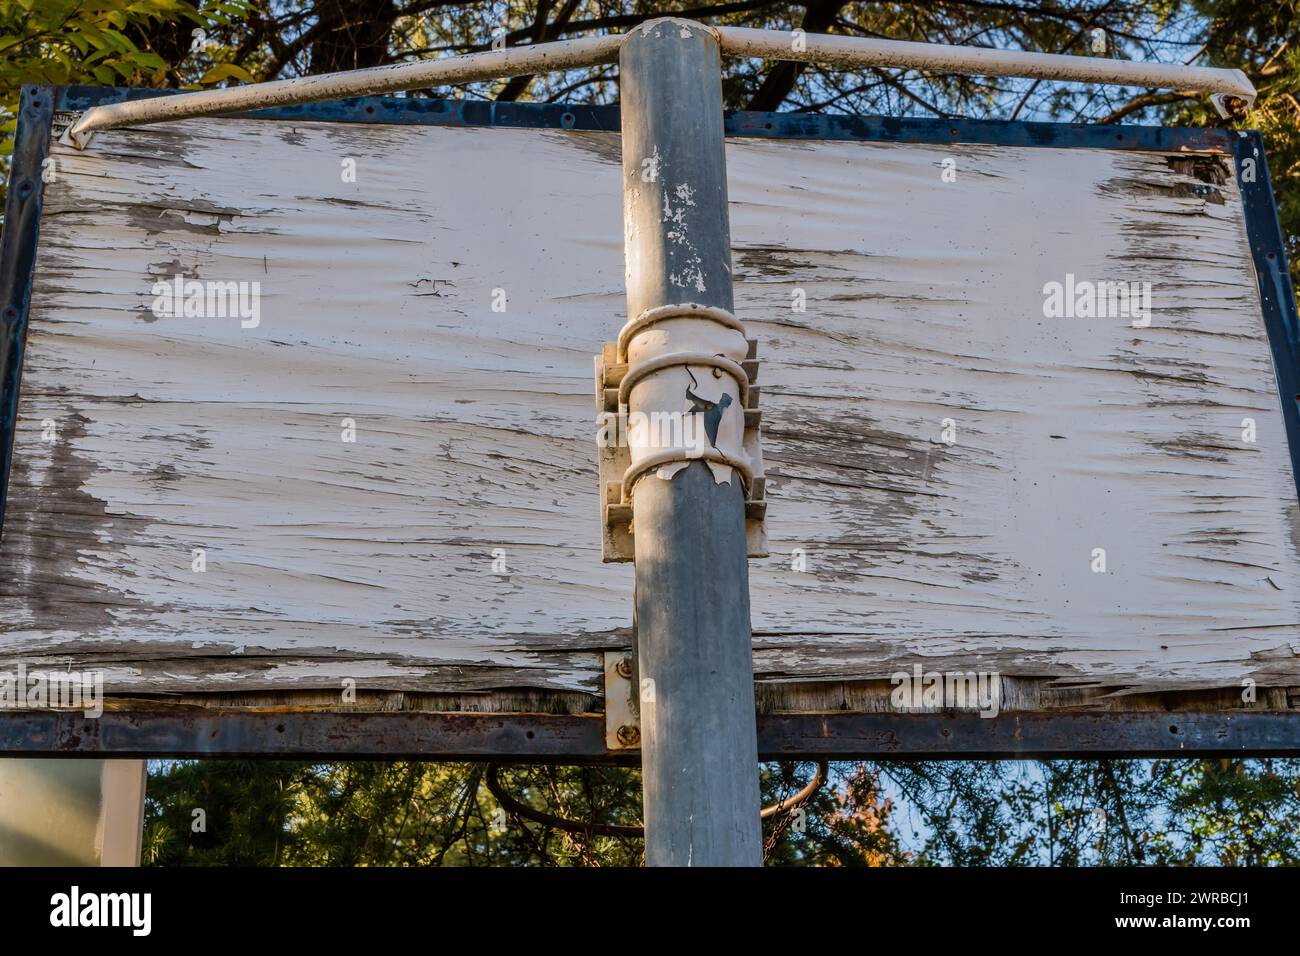 Close-up of a damaged basketball backboard showing signs of corrosion, in South Korea Stock Photo